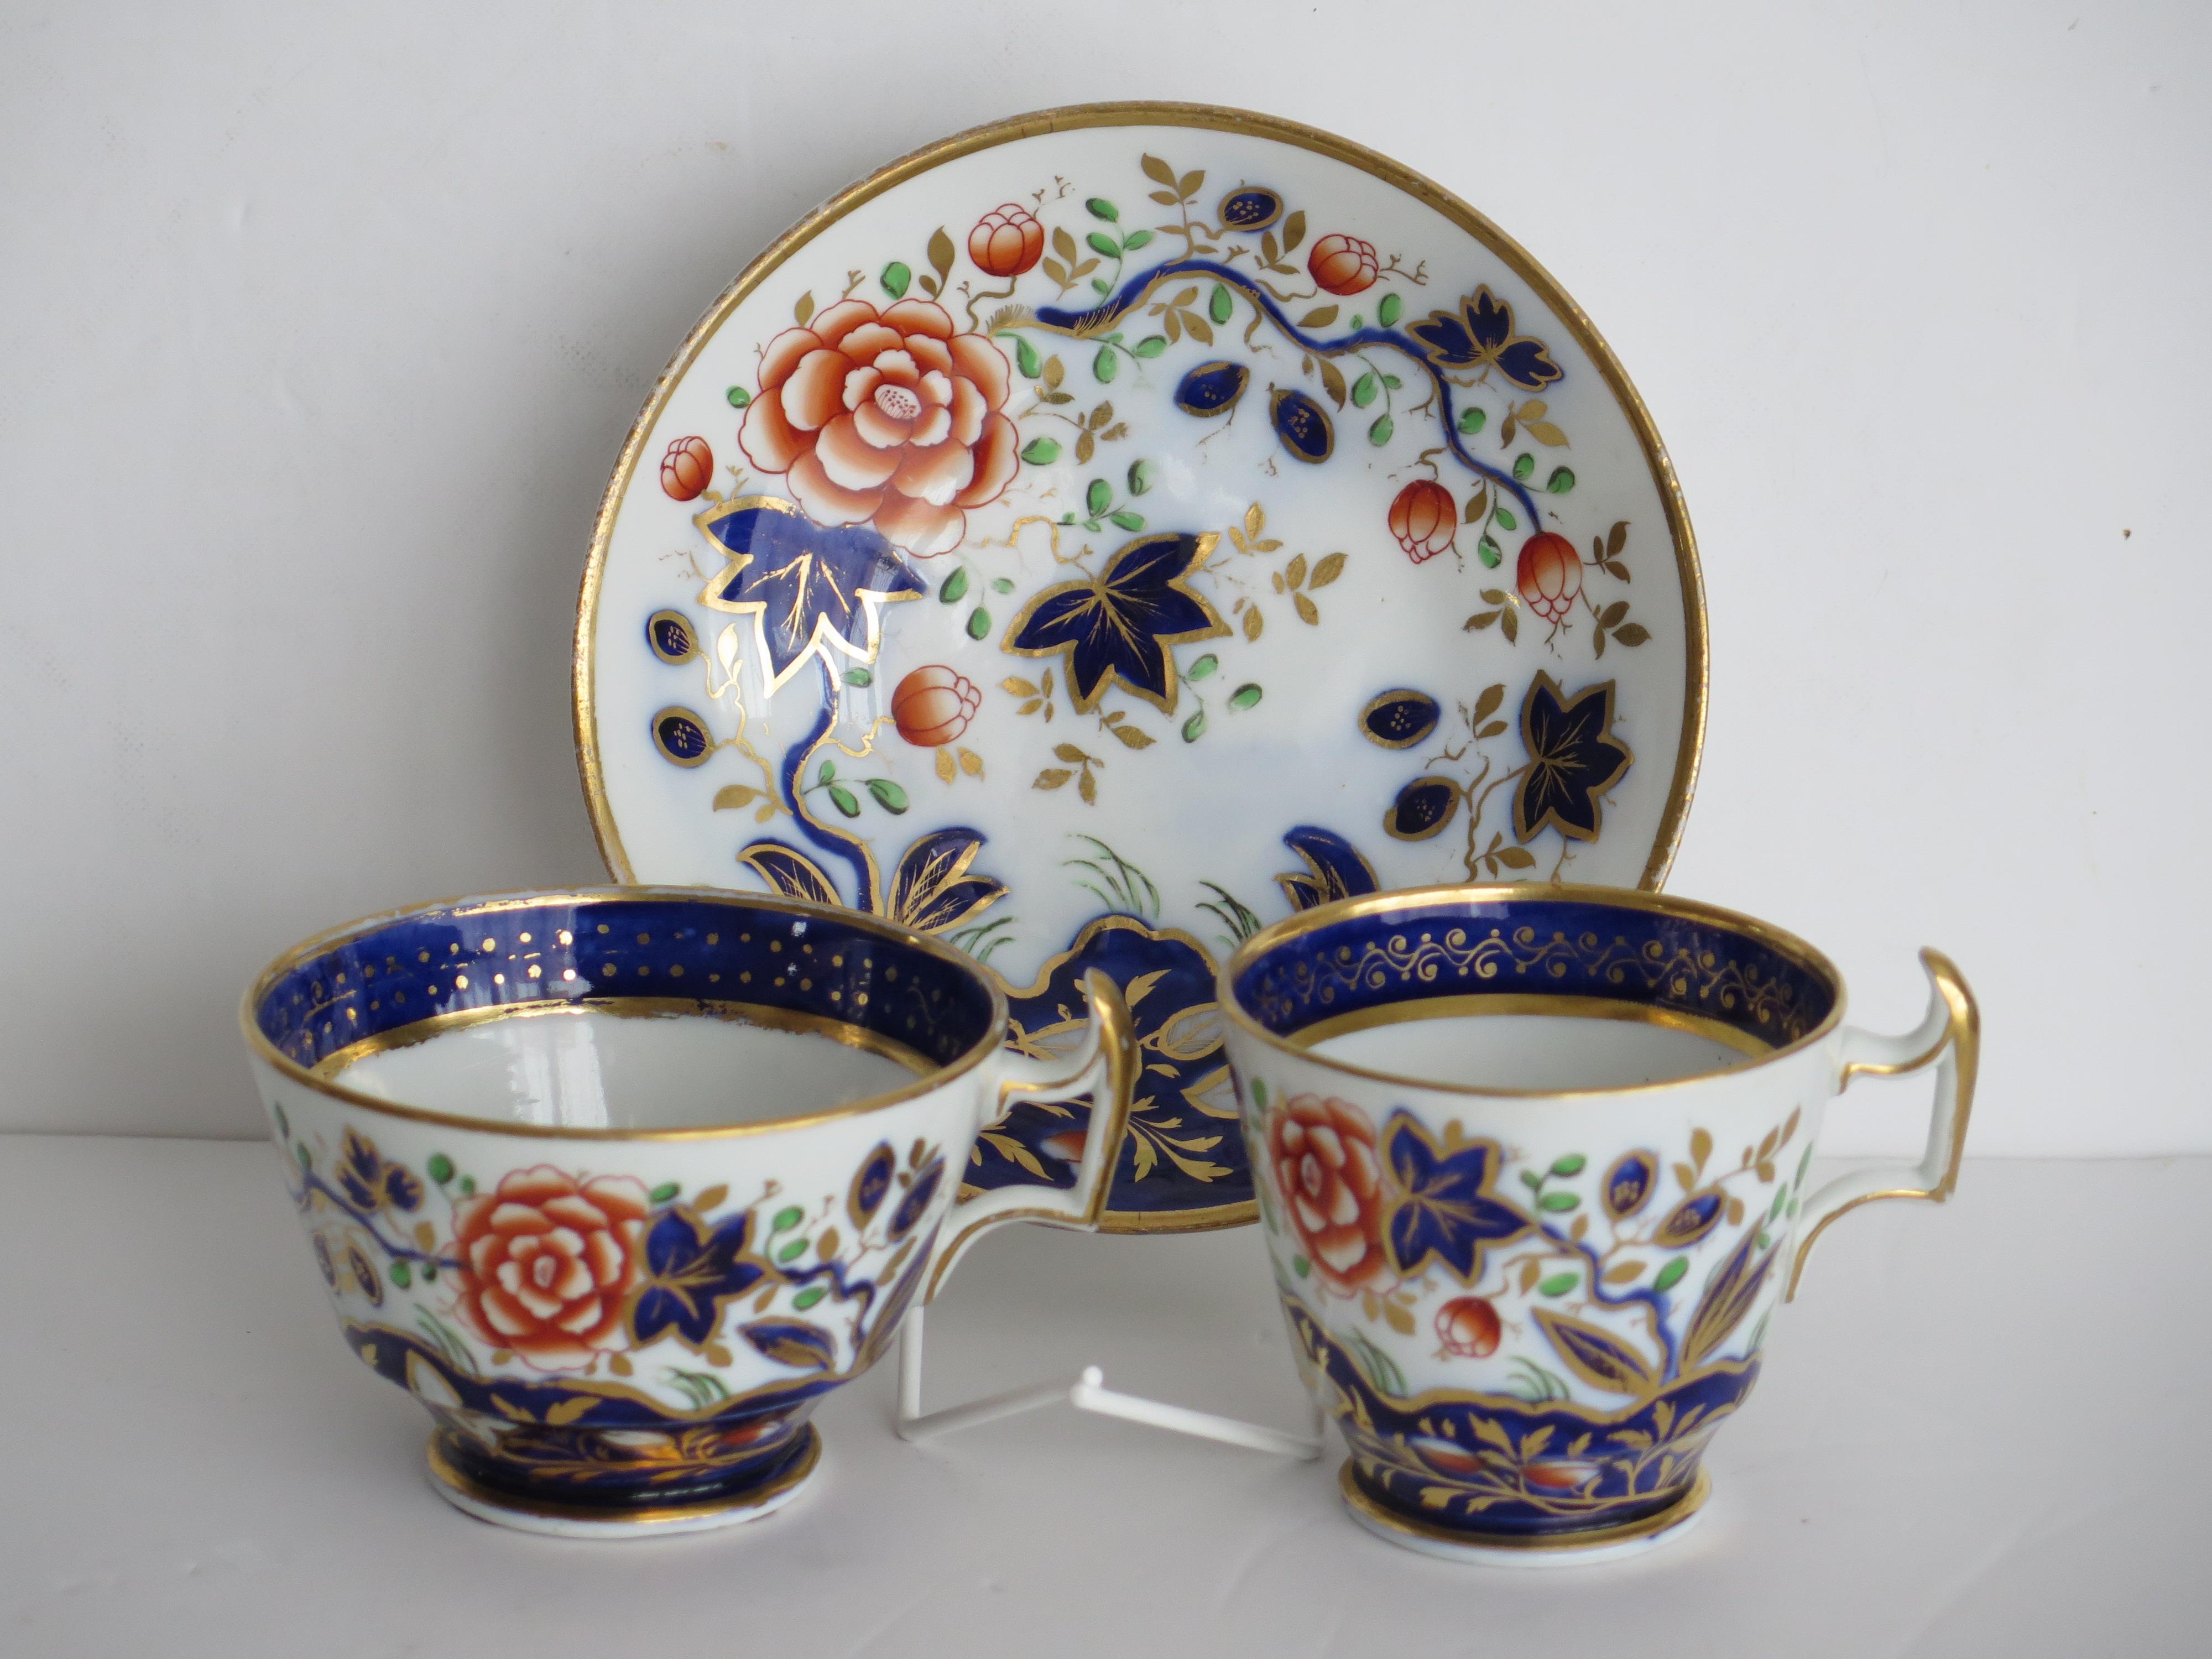 This is a very good quality TRIO of Coffee Cup, Tea Cup and Saucer that we attribute to the Coalport porcelain works, Shropshire, England, made during the George 111rd years, circa 1815.

Both cups have the London or Grecian shape with all pieces